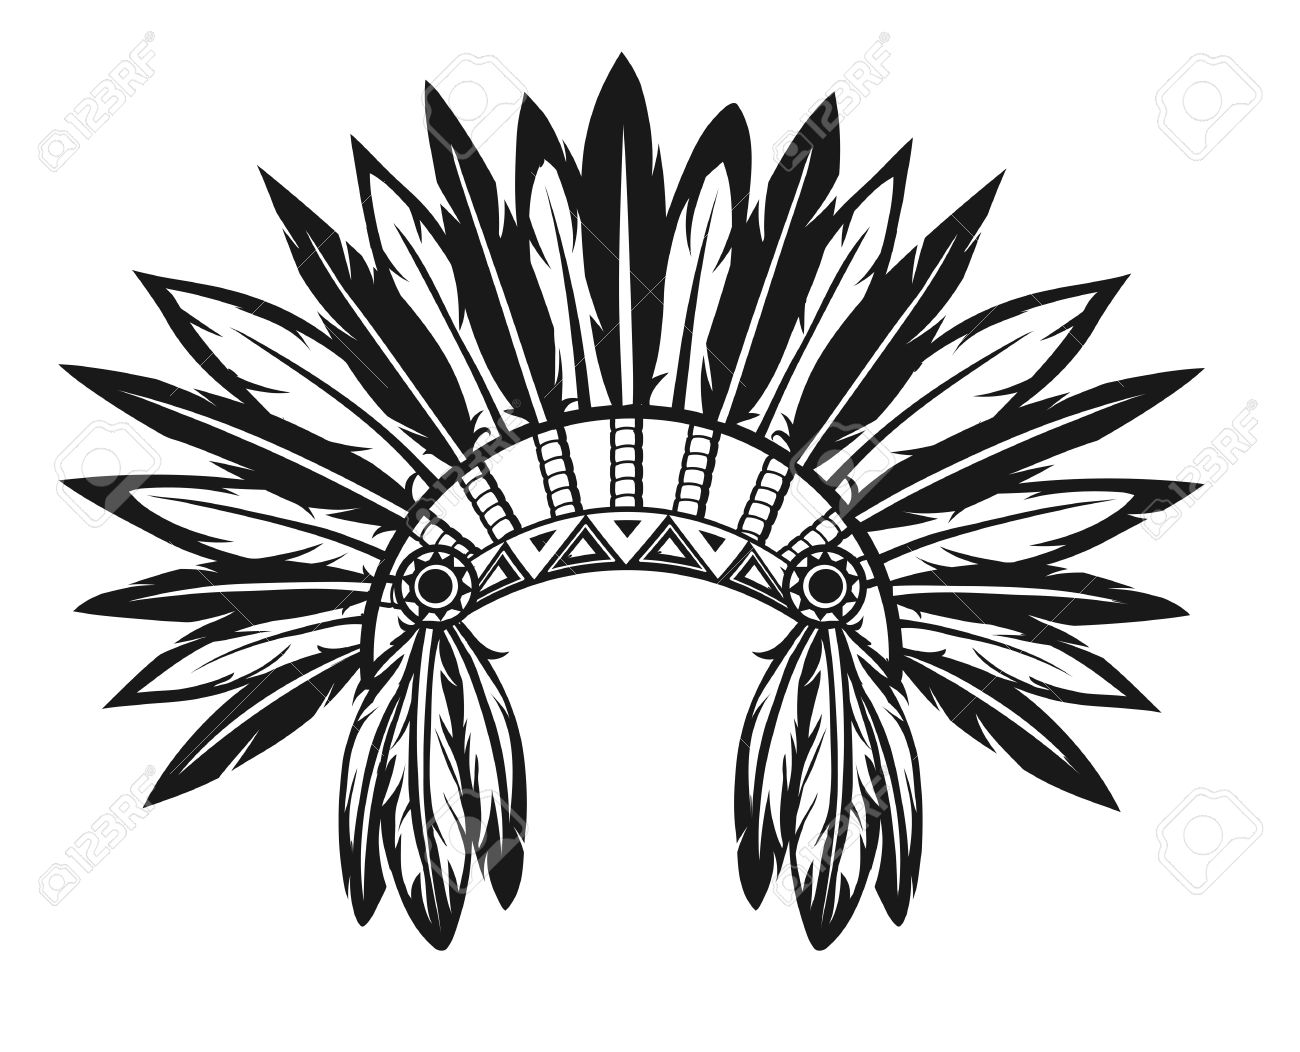 Headdress clipart #5, Download drawings